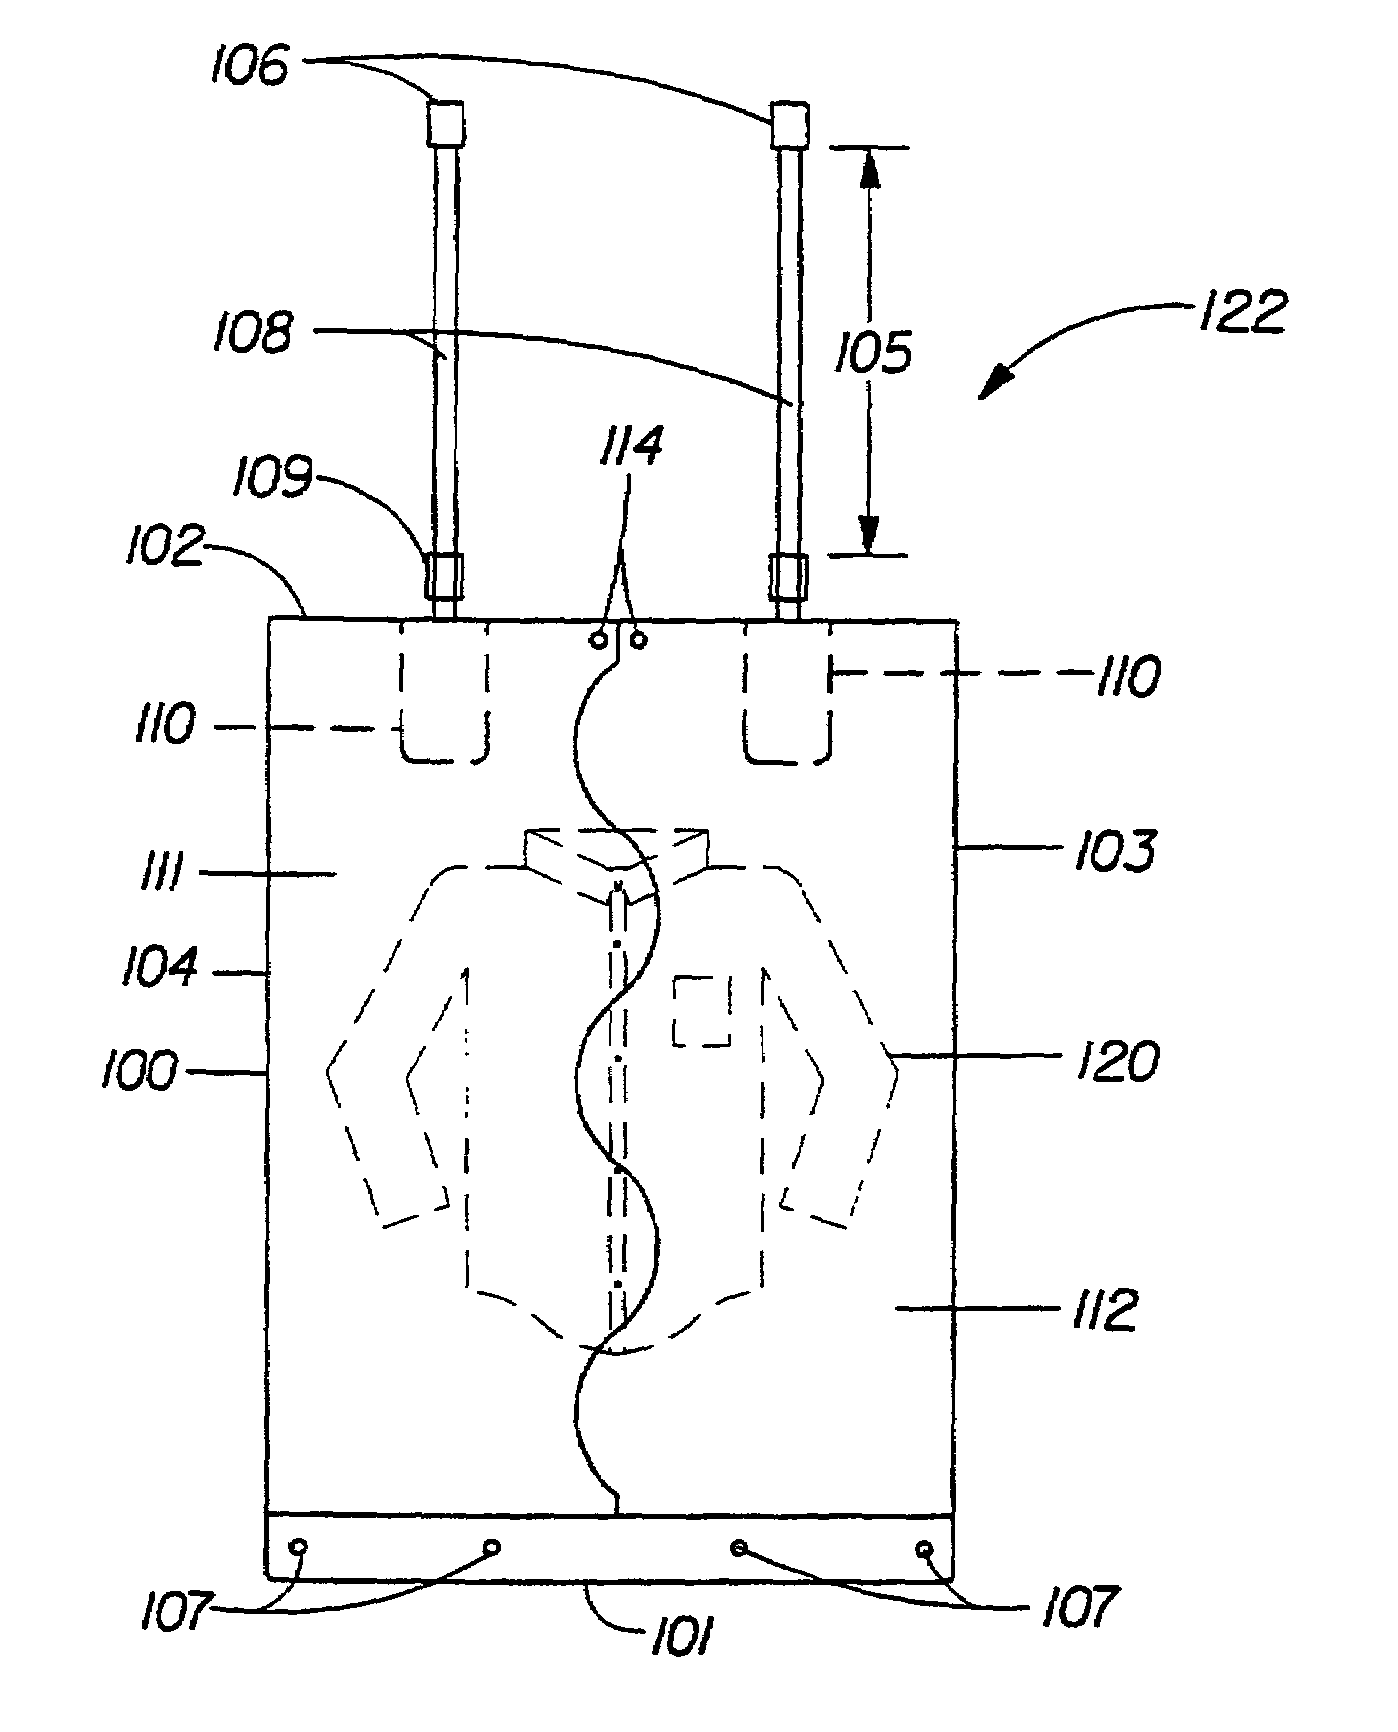 Methods for laundering delicate garments in a washing machine comprising a woven acrylic coated polyester garment container